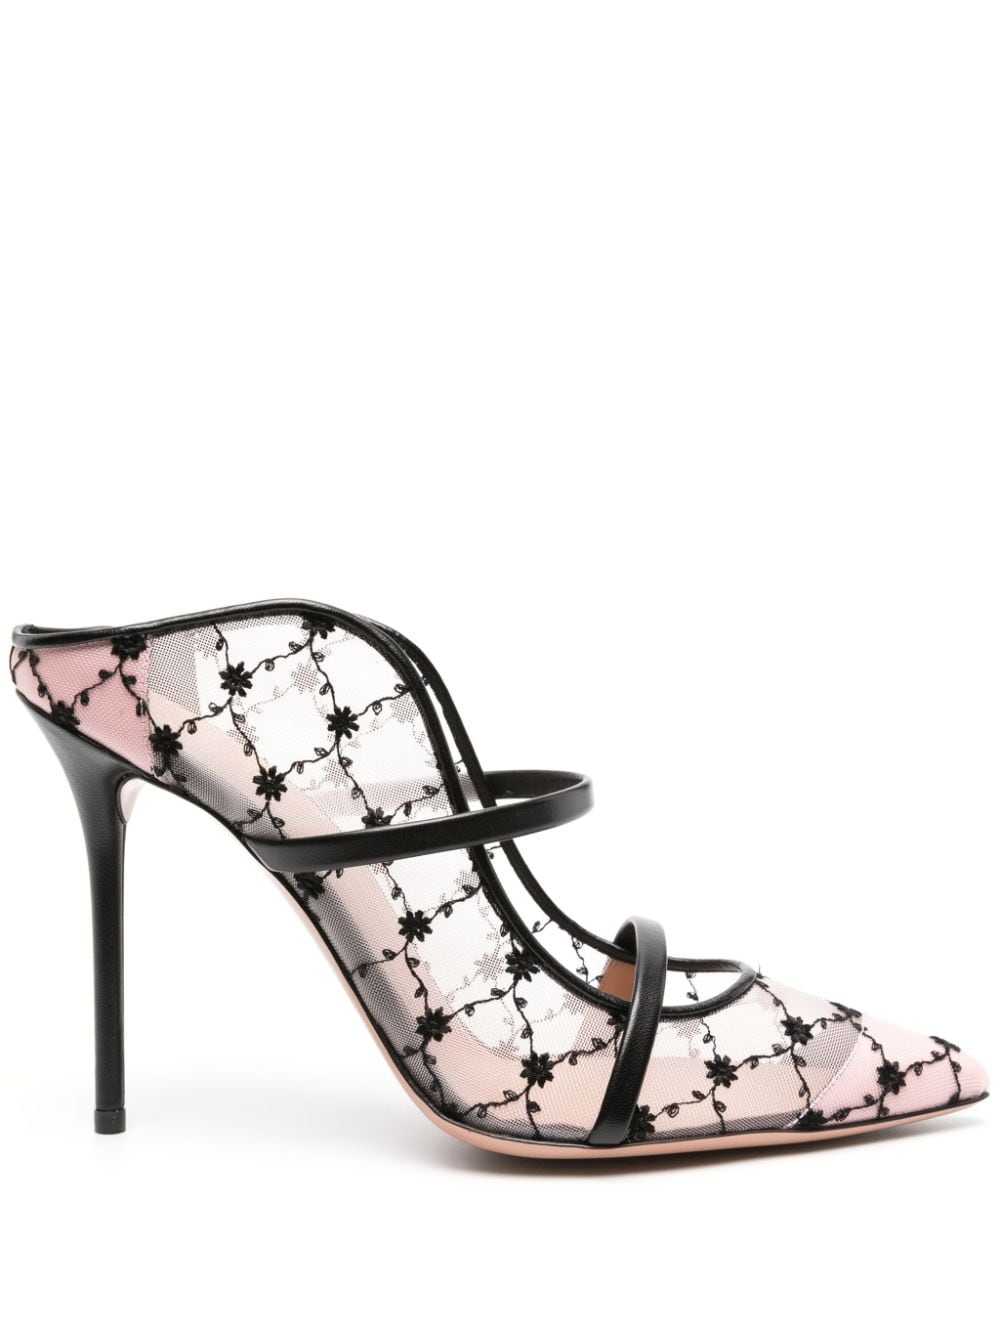 Malone Souliers Maureen Mules 100mm - Rosa von Malone Souliers